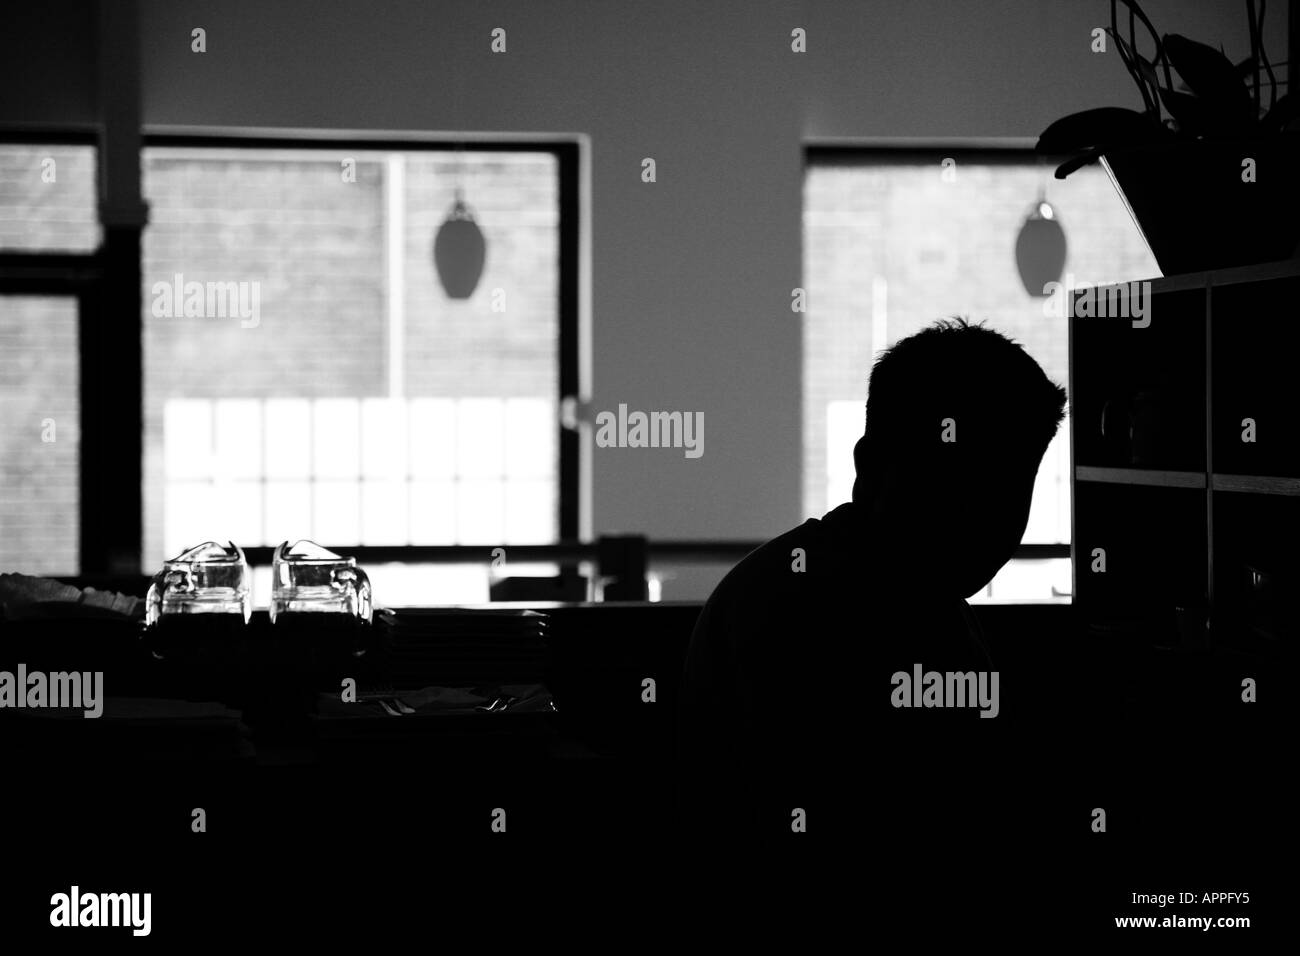 Silluette of man in front of a window in a room Stock Photo